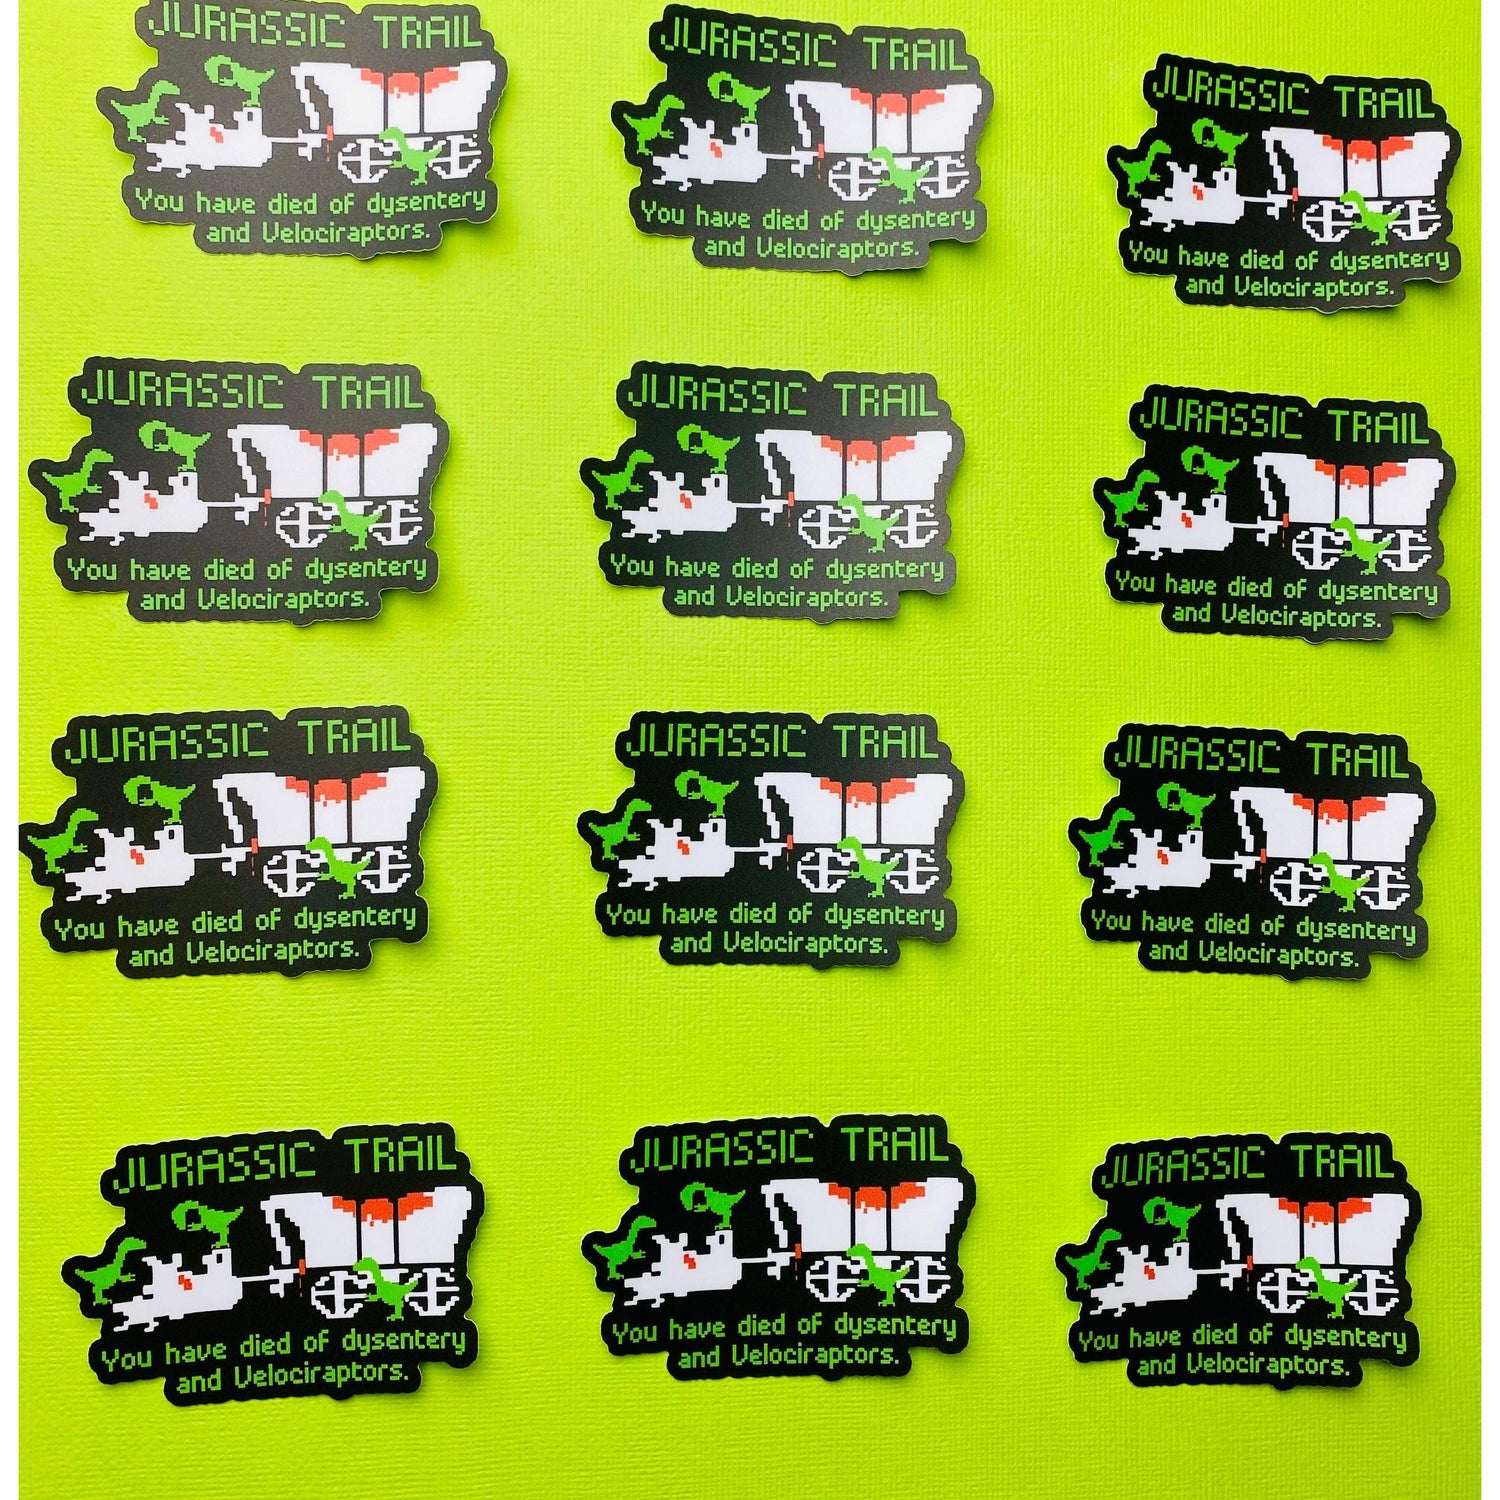 Jurassic Oregon Trail Sticker Eighties Sticker 1980s Sticker Retro Gaming Sticker Funny Decal for Eighties Kids and Velociraptors - Ottos Grotto :: Stickers For Your Stuff